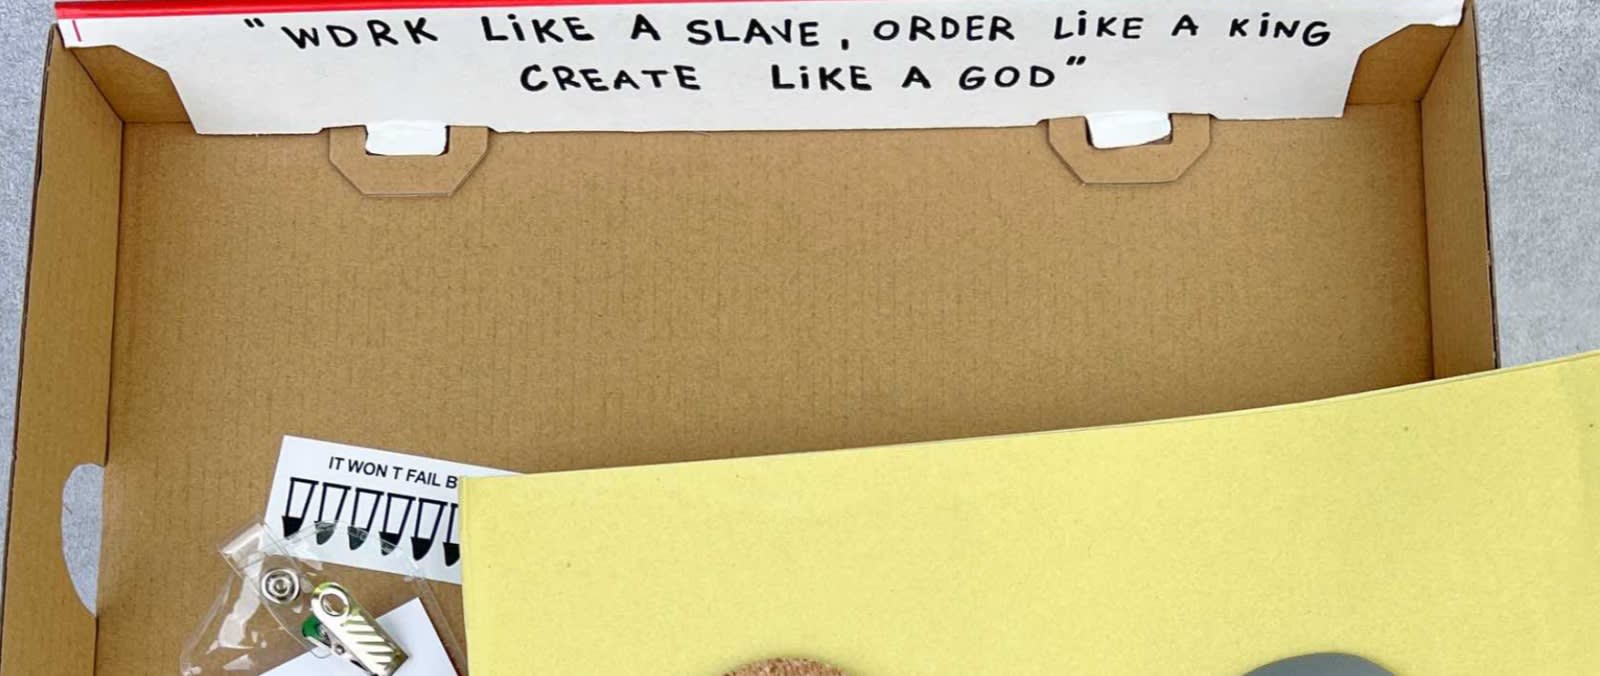 Nike Covered Up a Reference to Slave Work on Tom Sachs Sneaker Box